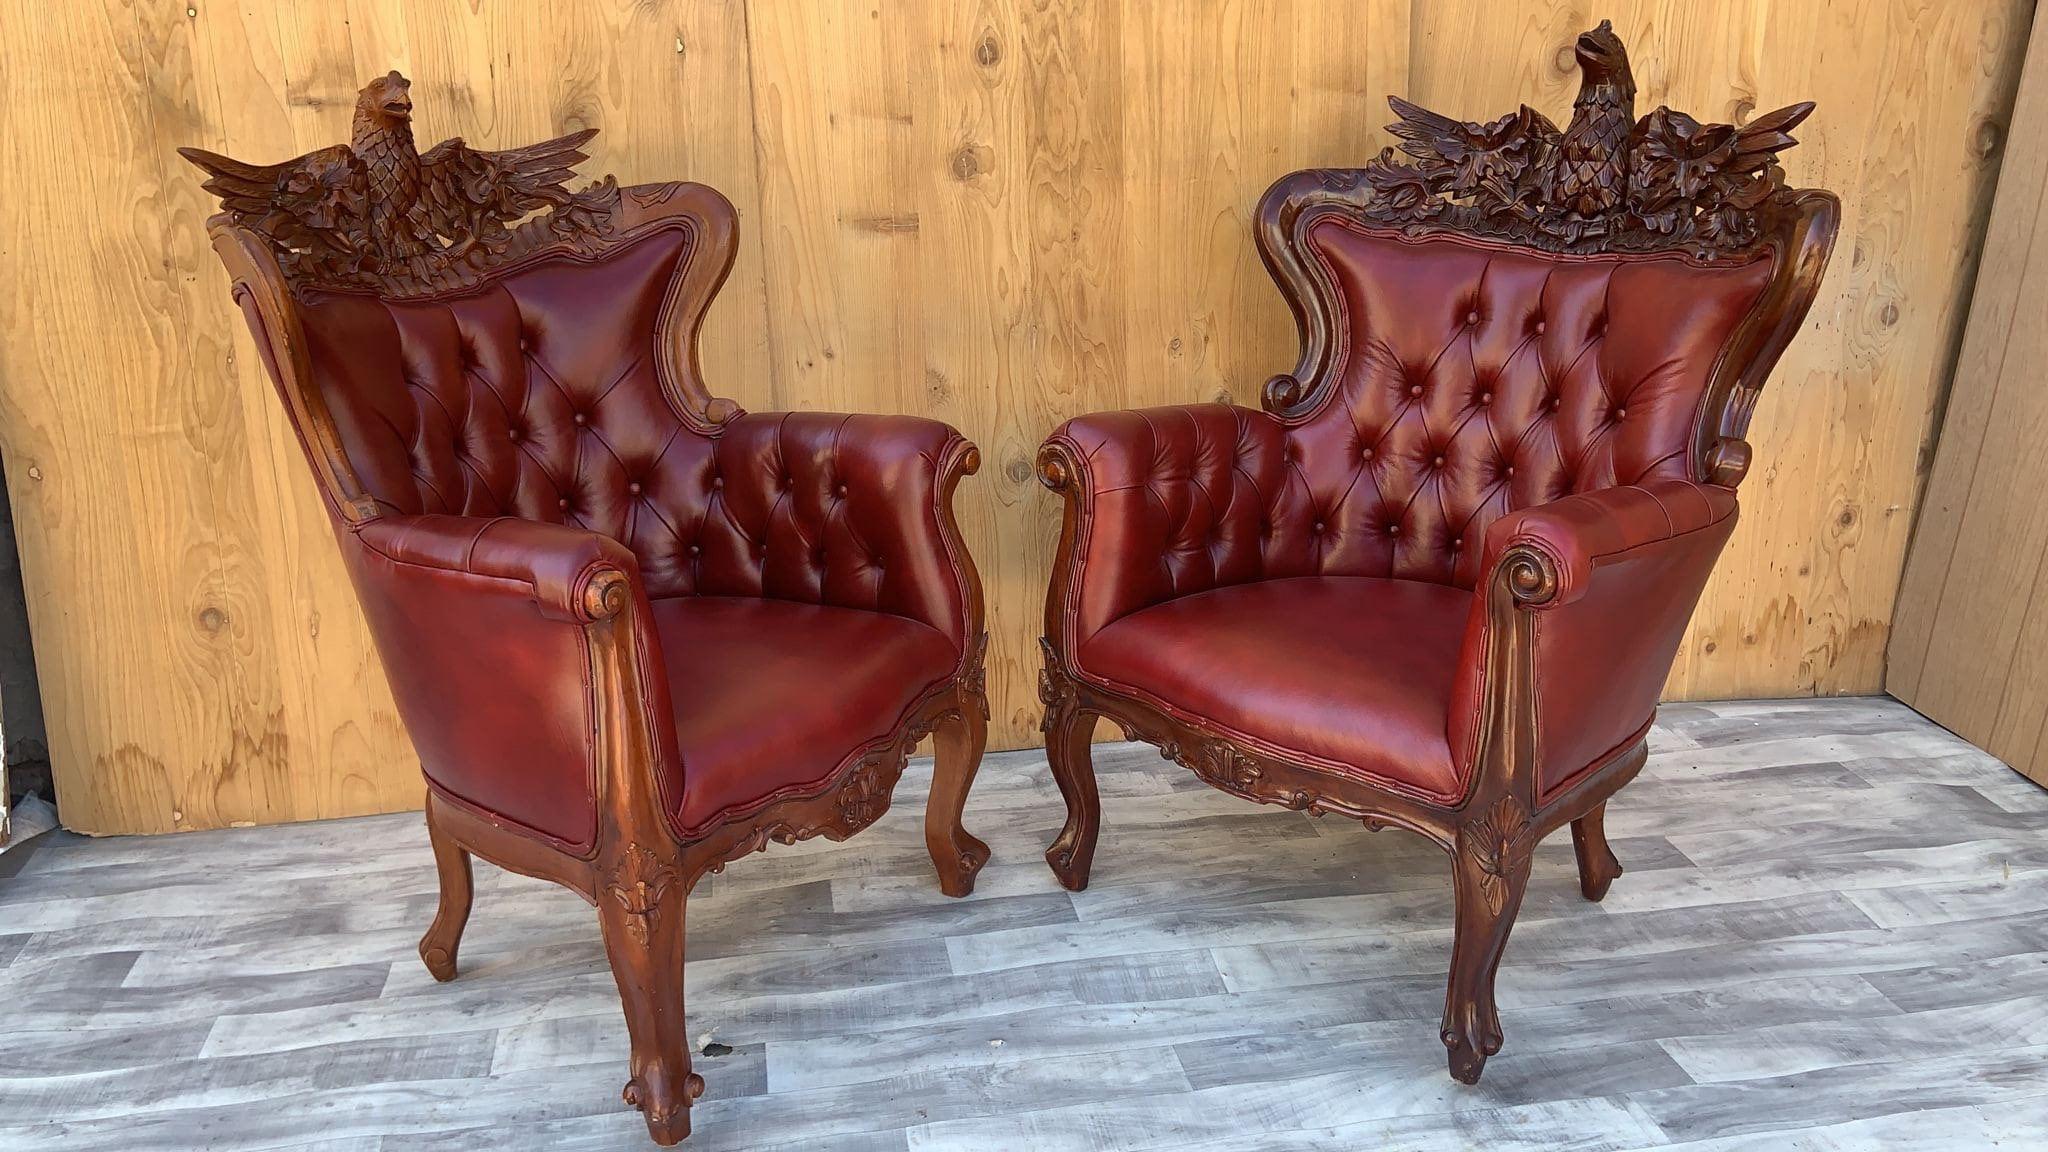 Antique Federal Style carved ornate tufted parlor set newly upholstered in a cabernet leather - 4 piece set

Absolutely exquisite and rare antique, intricately detailed hand carved American Eagle topped 4 piece tufted leather library parlor set.